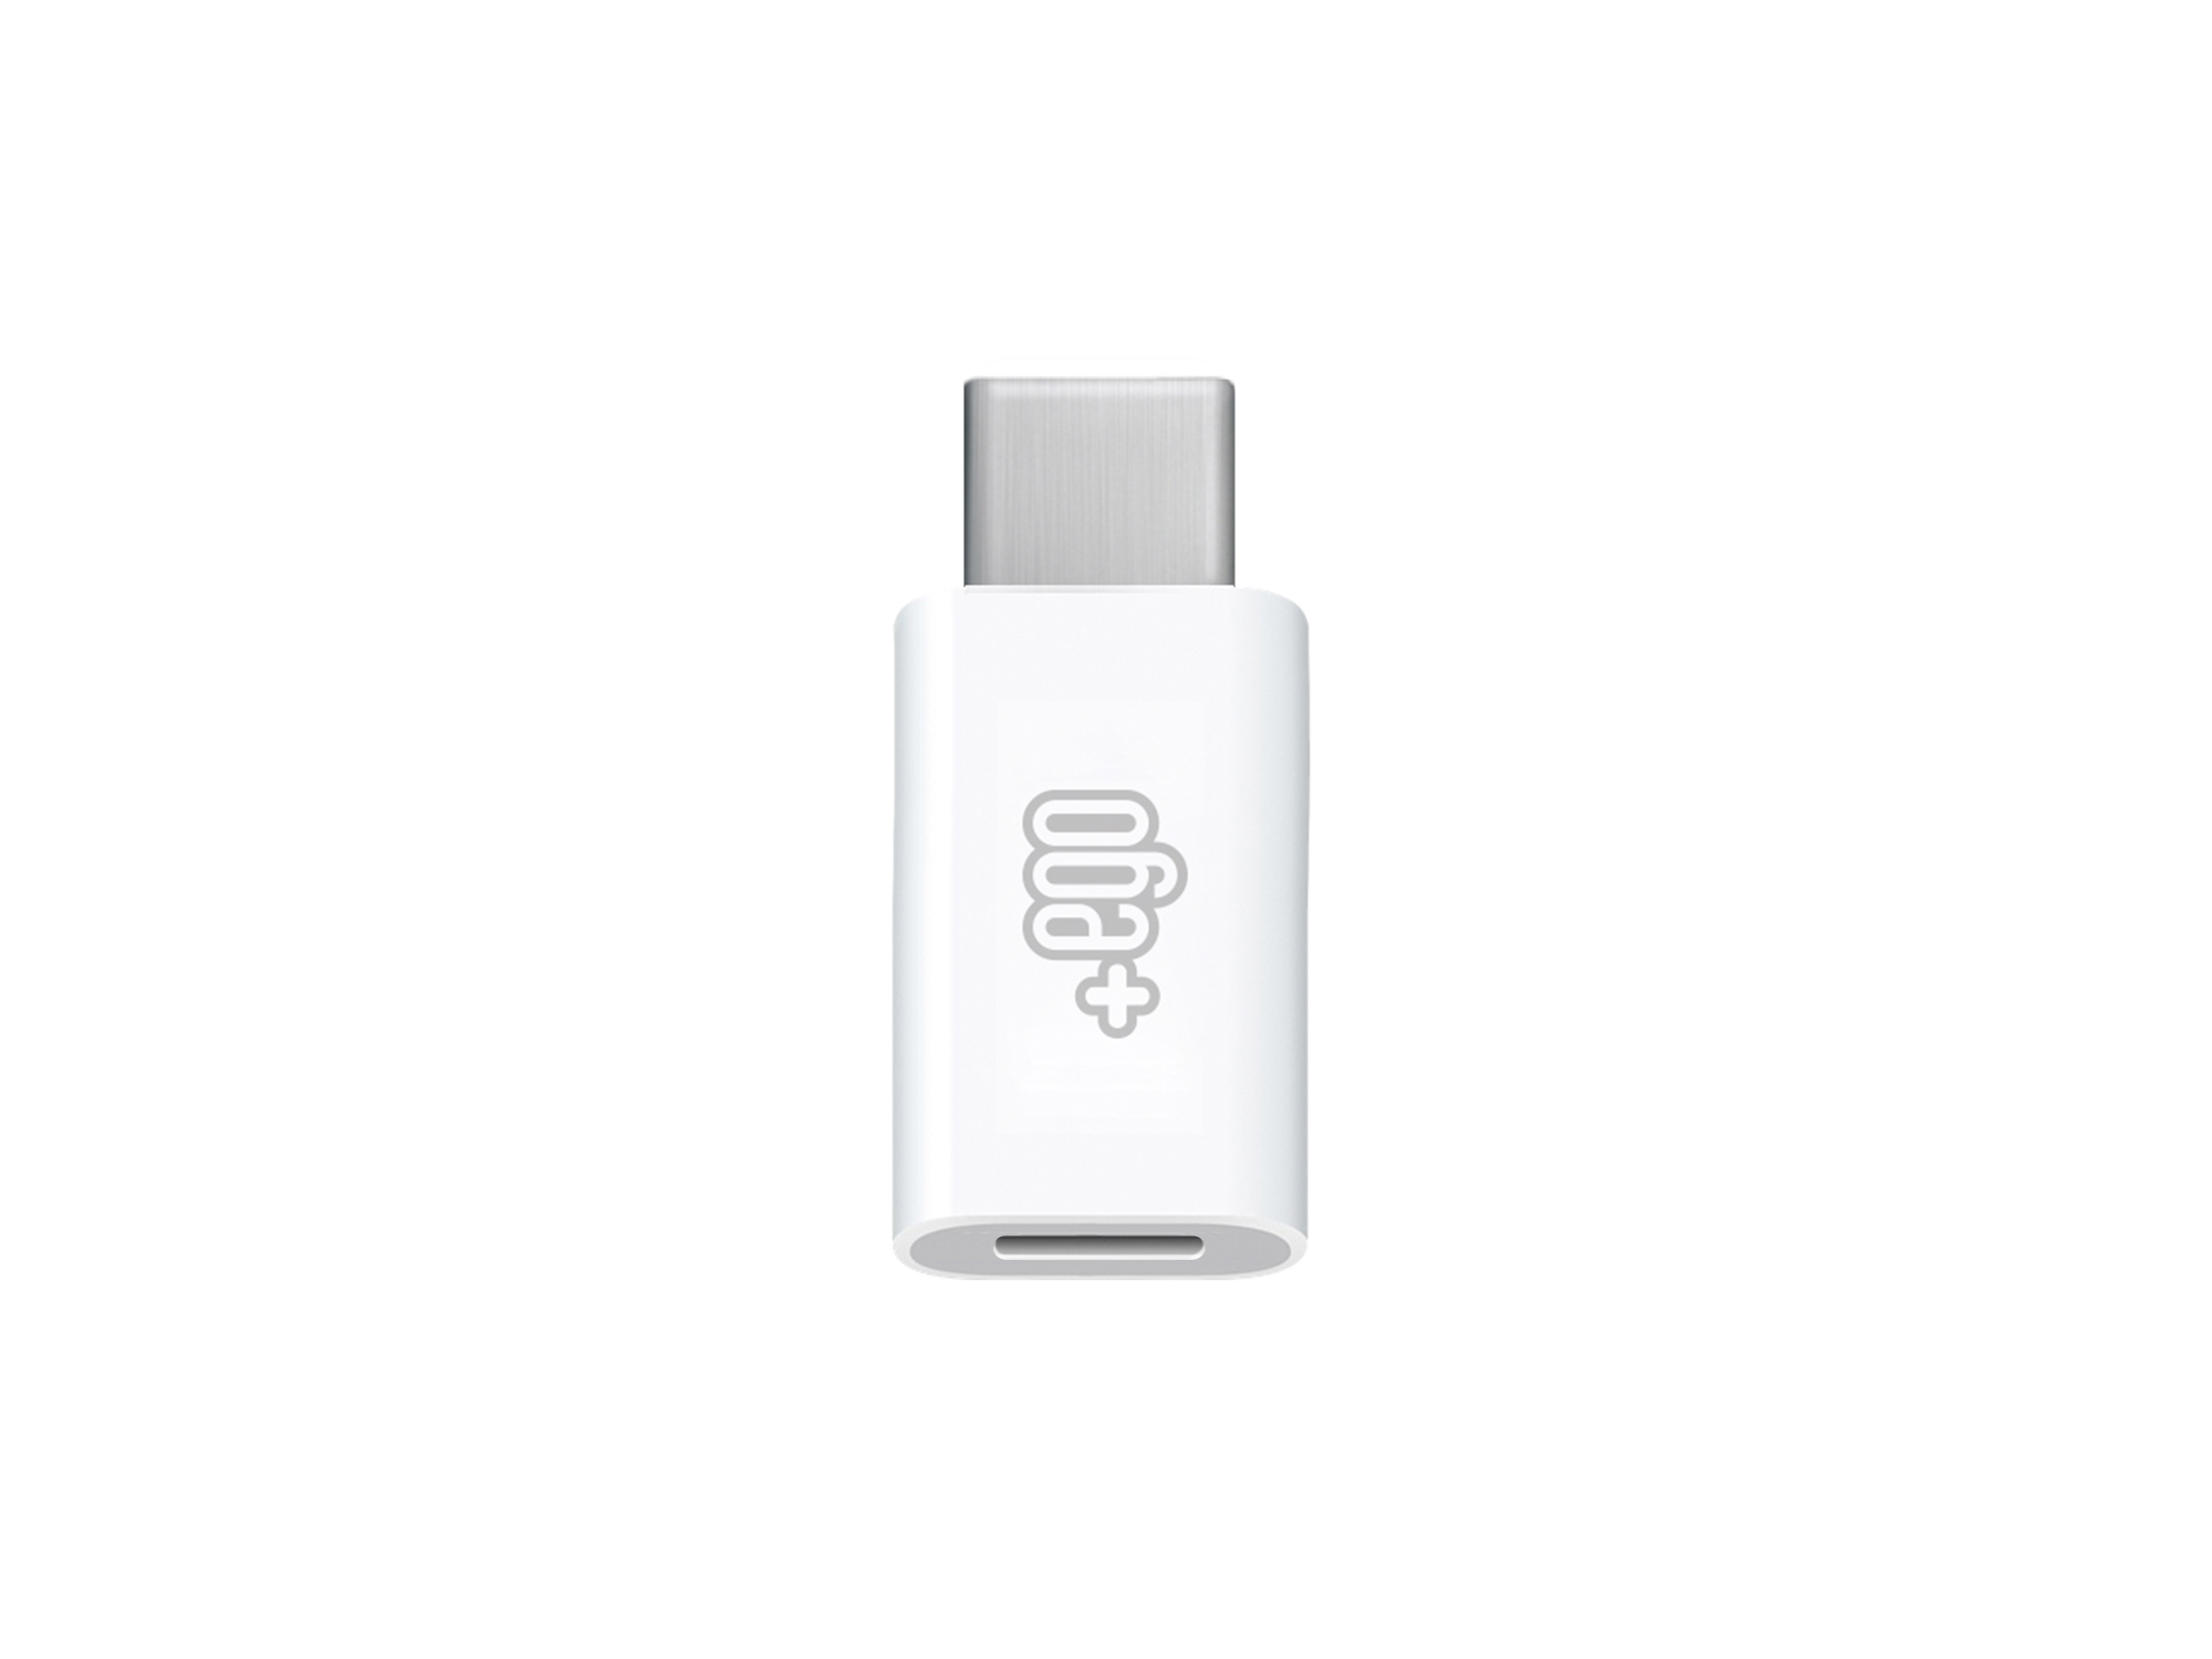 Tcl TCL 10 5G - Lightning to Type-C Adapter White